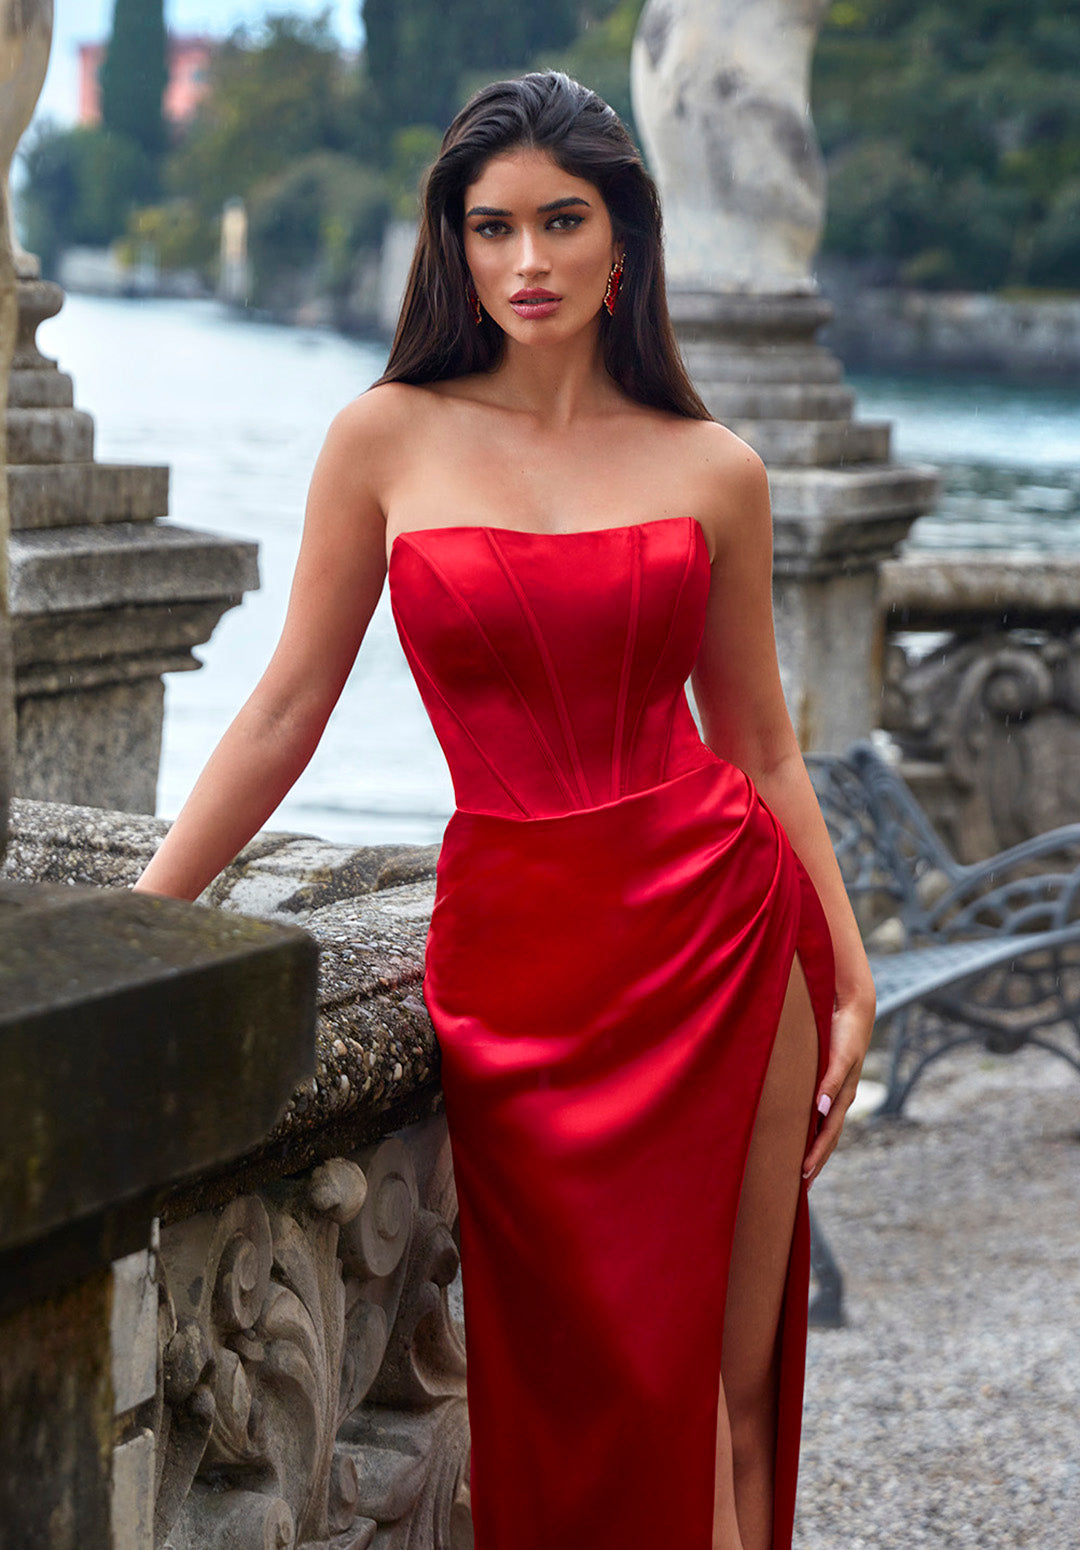 The Red Carpet Boutique Formal Wear - Women's Special Occasion & Prom Dress  Store